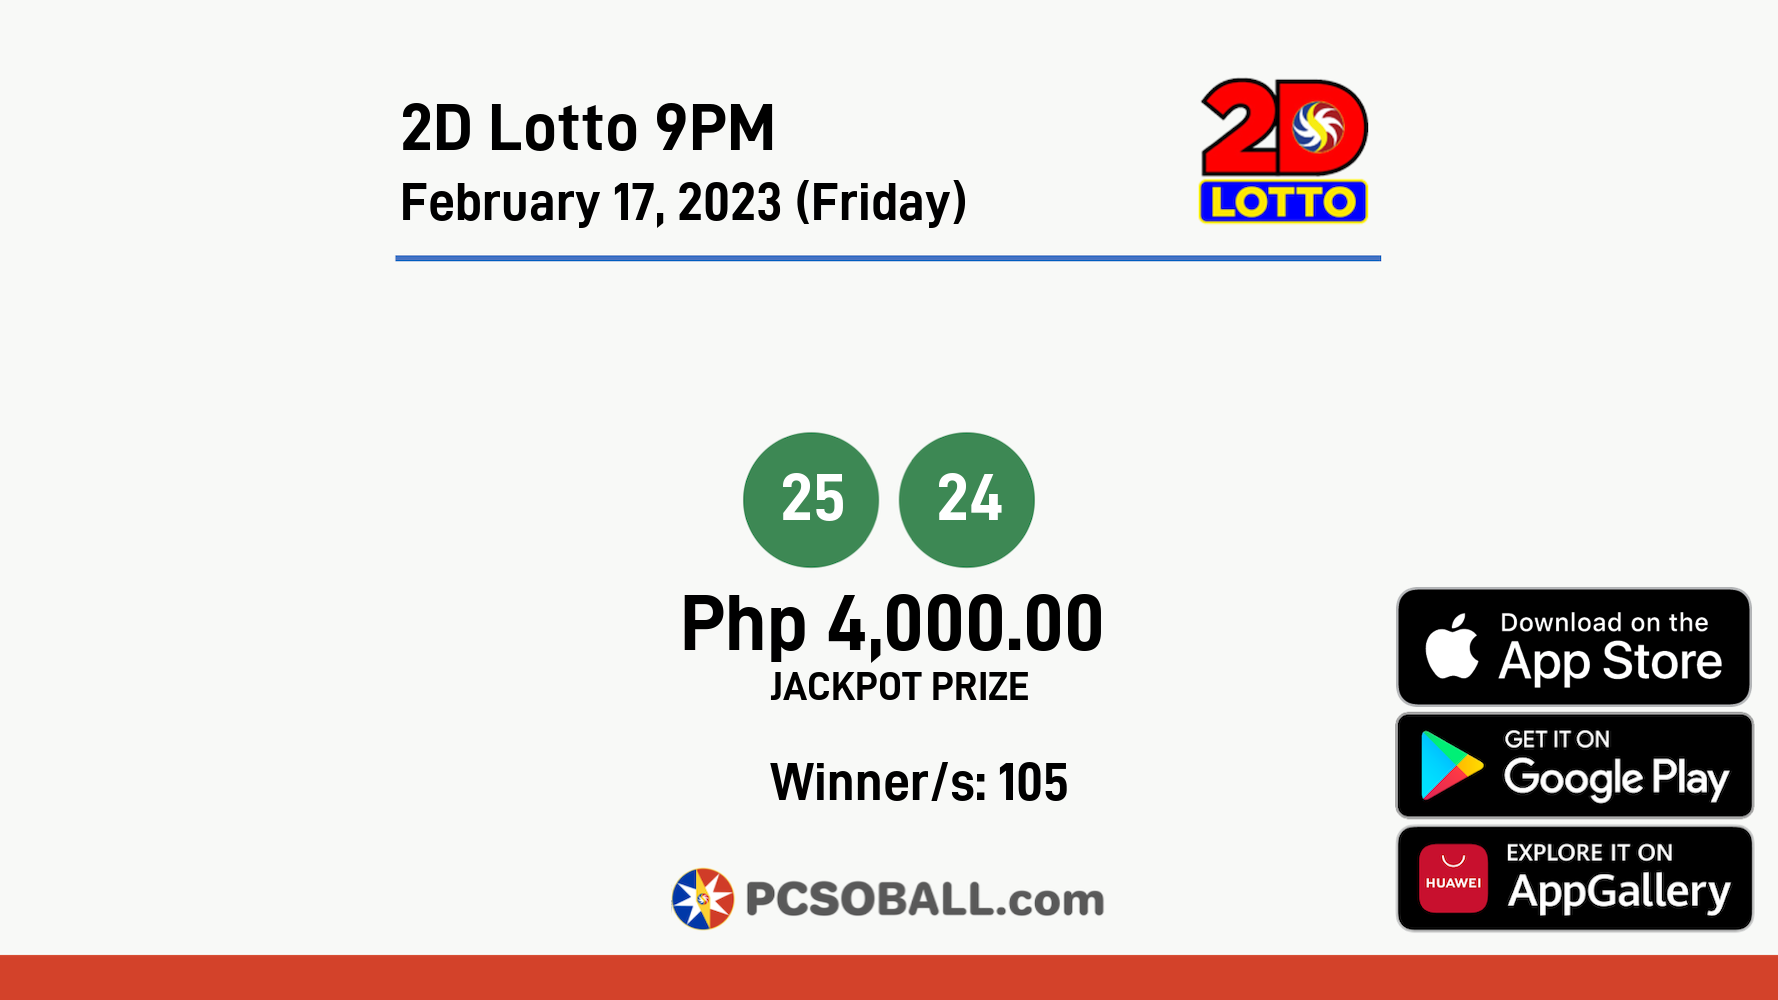 2D Lotto 9PM February 17, 2023 (Friday) Result